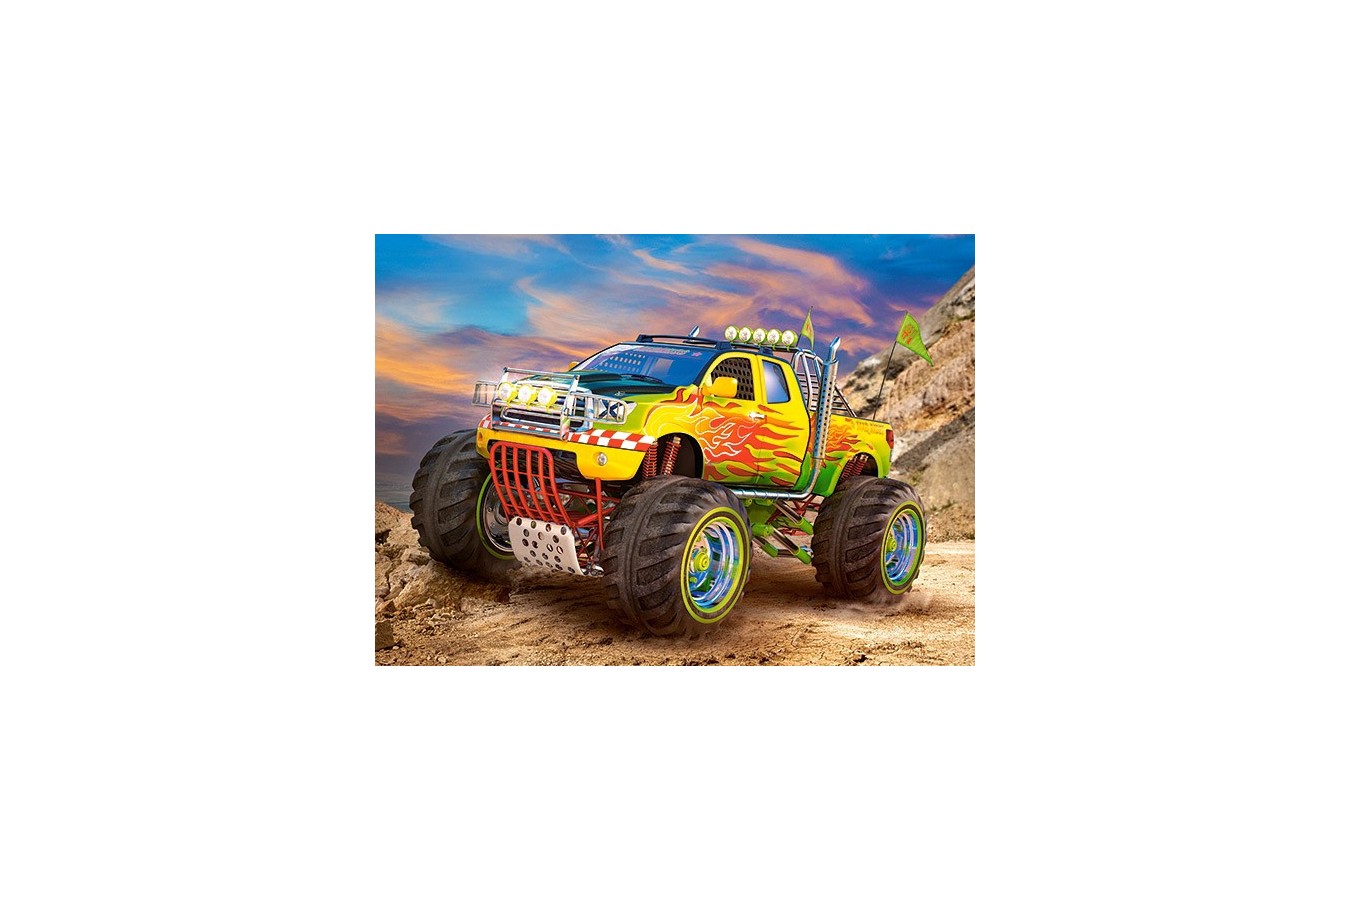 Puzzle Castorland - Monster Truck, 260 piese